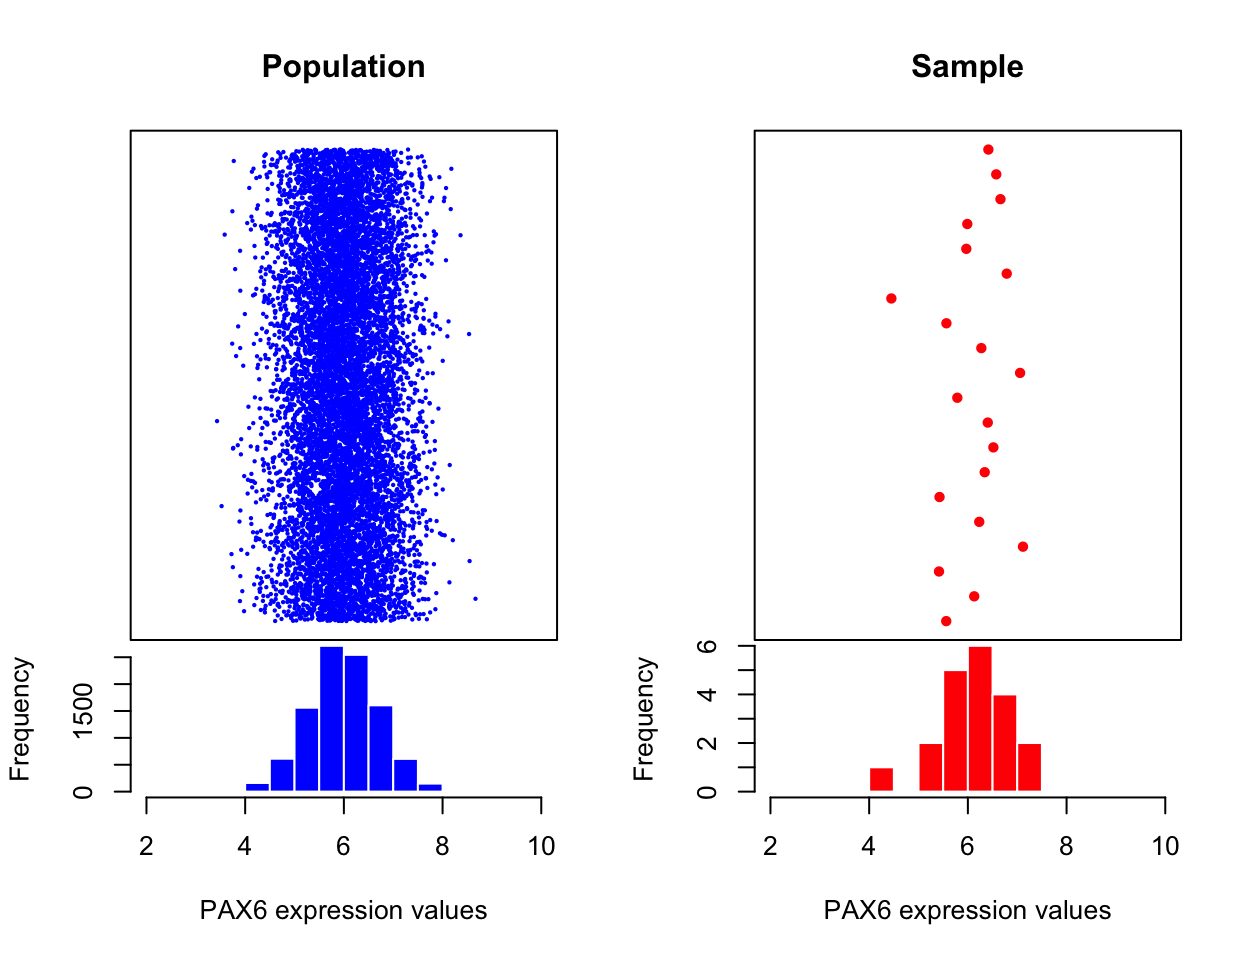 Expression of all possible PAX6 gene expression measures on all available biological samples (left). Expression of the PAX6 gene from the statistical sample, a random subset from the population of biological samples (right). 